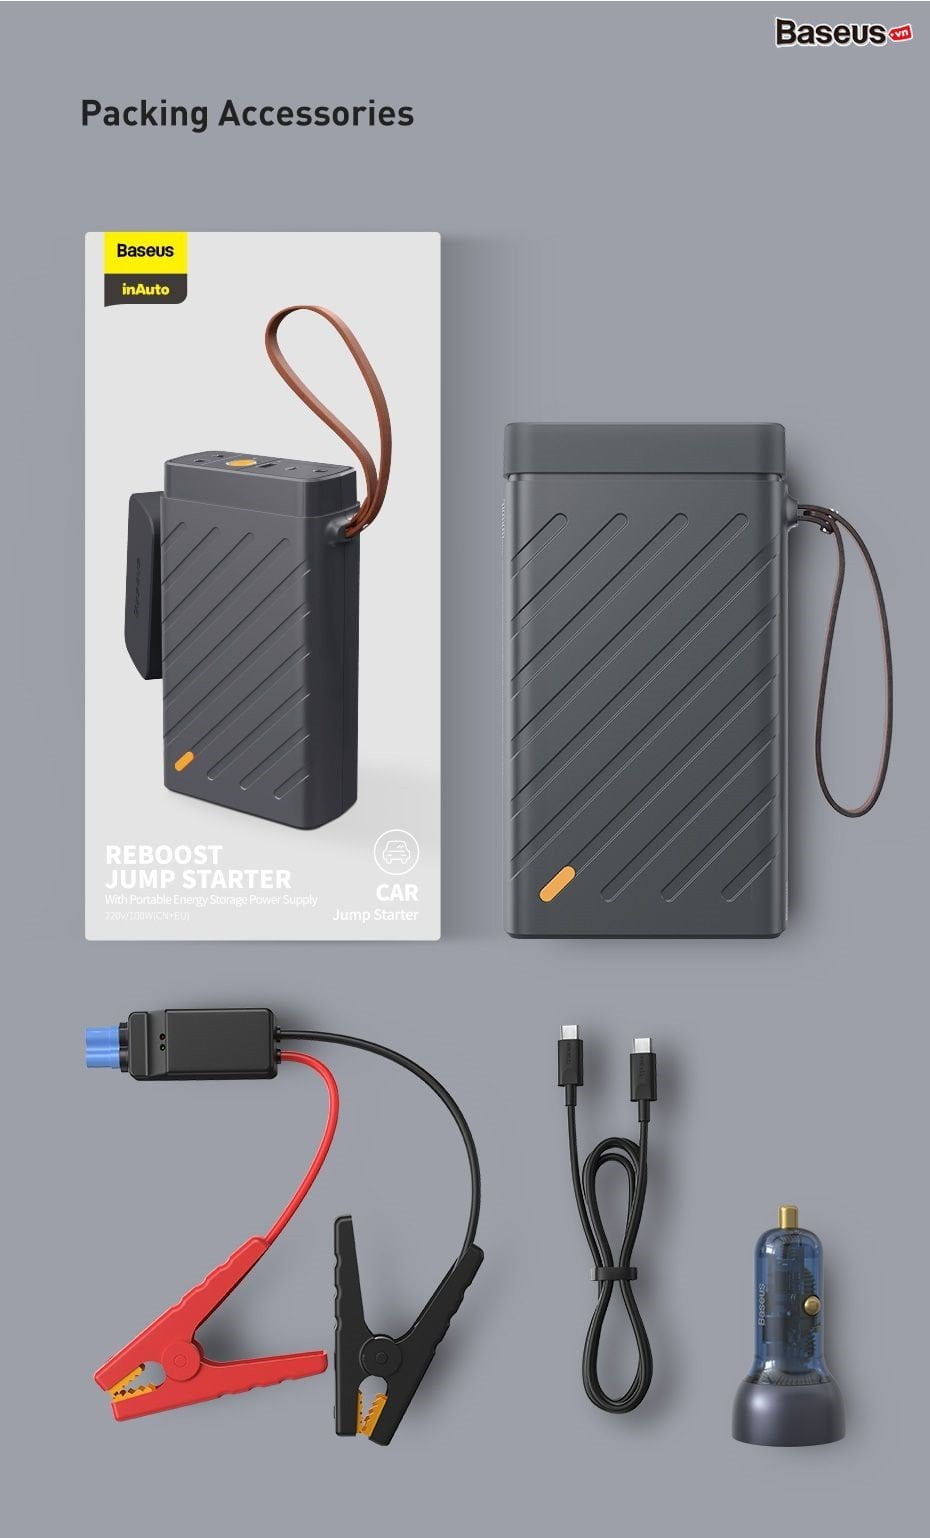 reboost jump starter with portable energy storage power supply 18 6e72cb998300487d95148a87ee5a1ebf